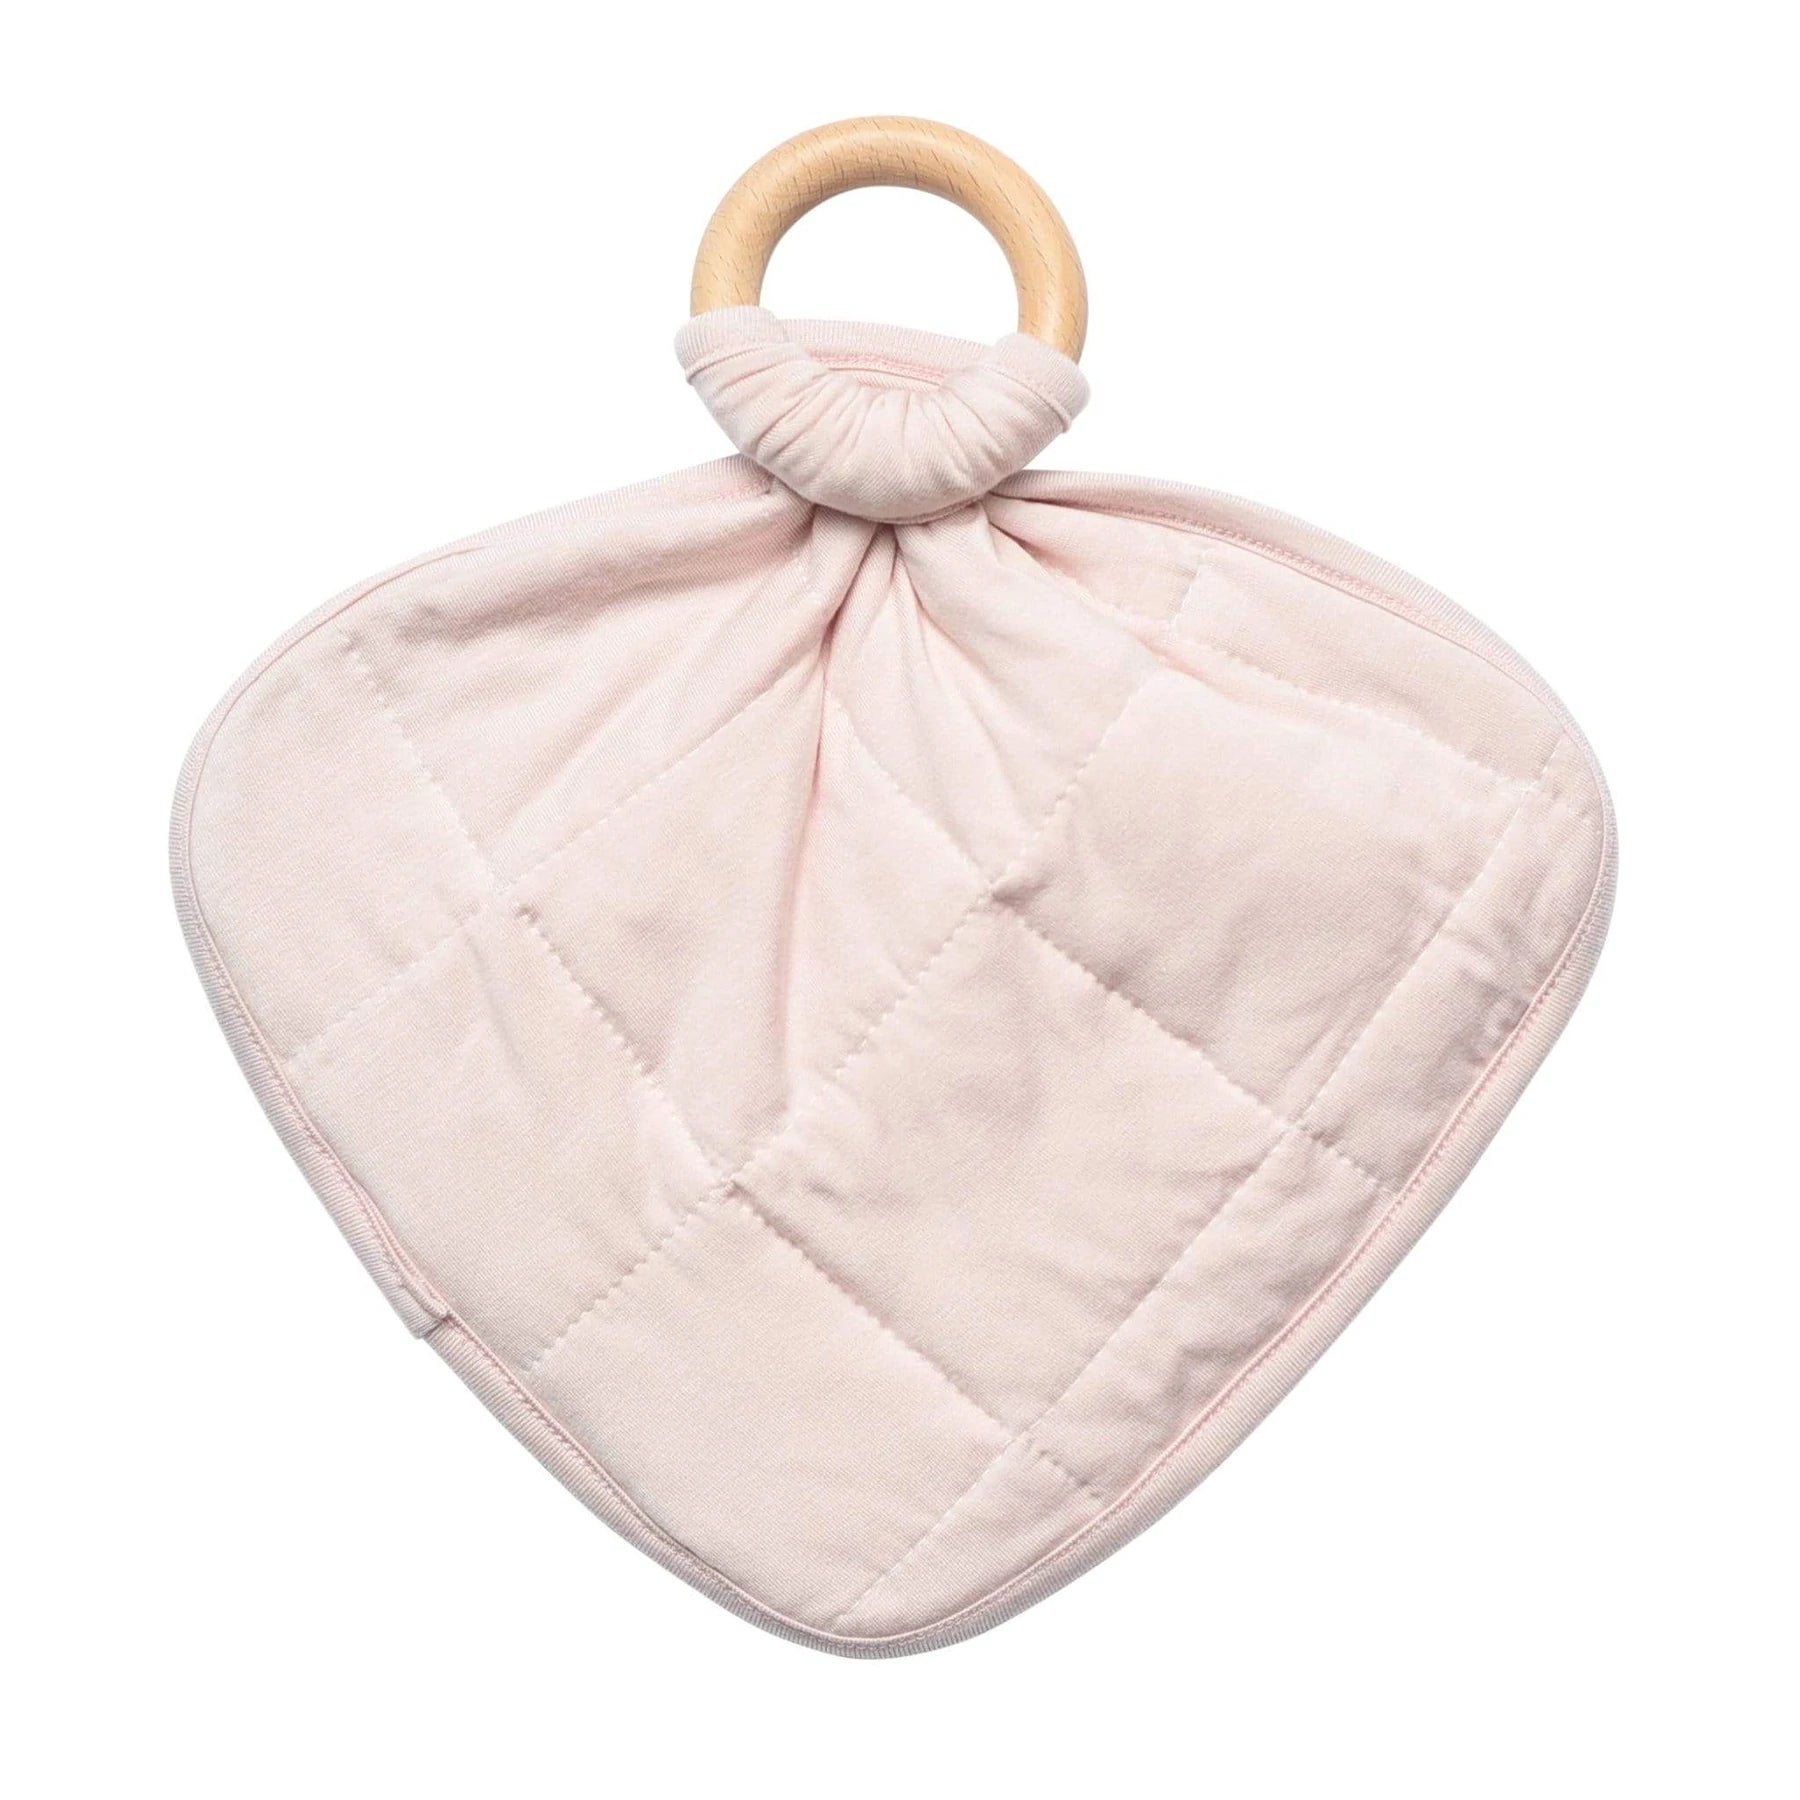 Lovey with Removable Teething Ring in Blush  - Doodlebug's Children's Boutique